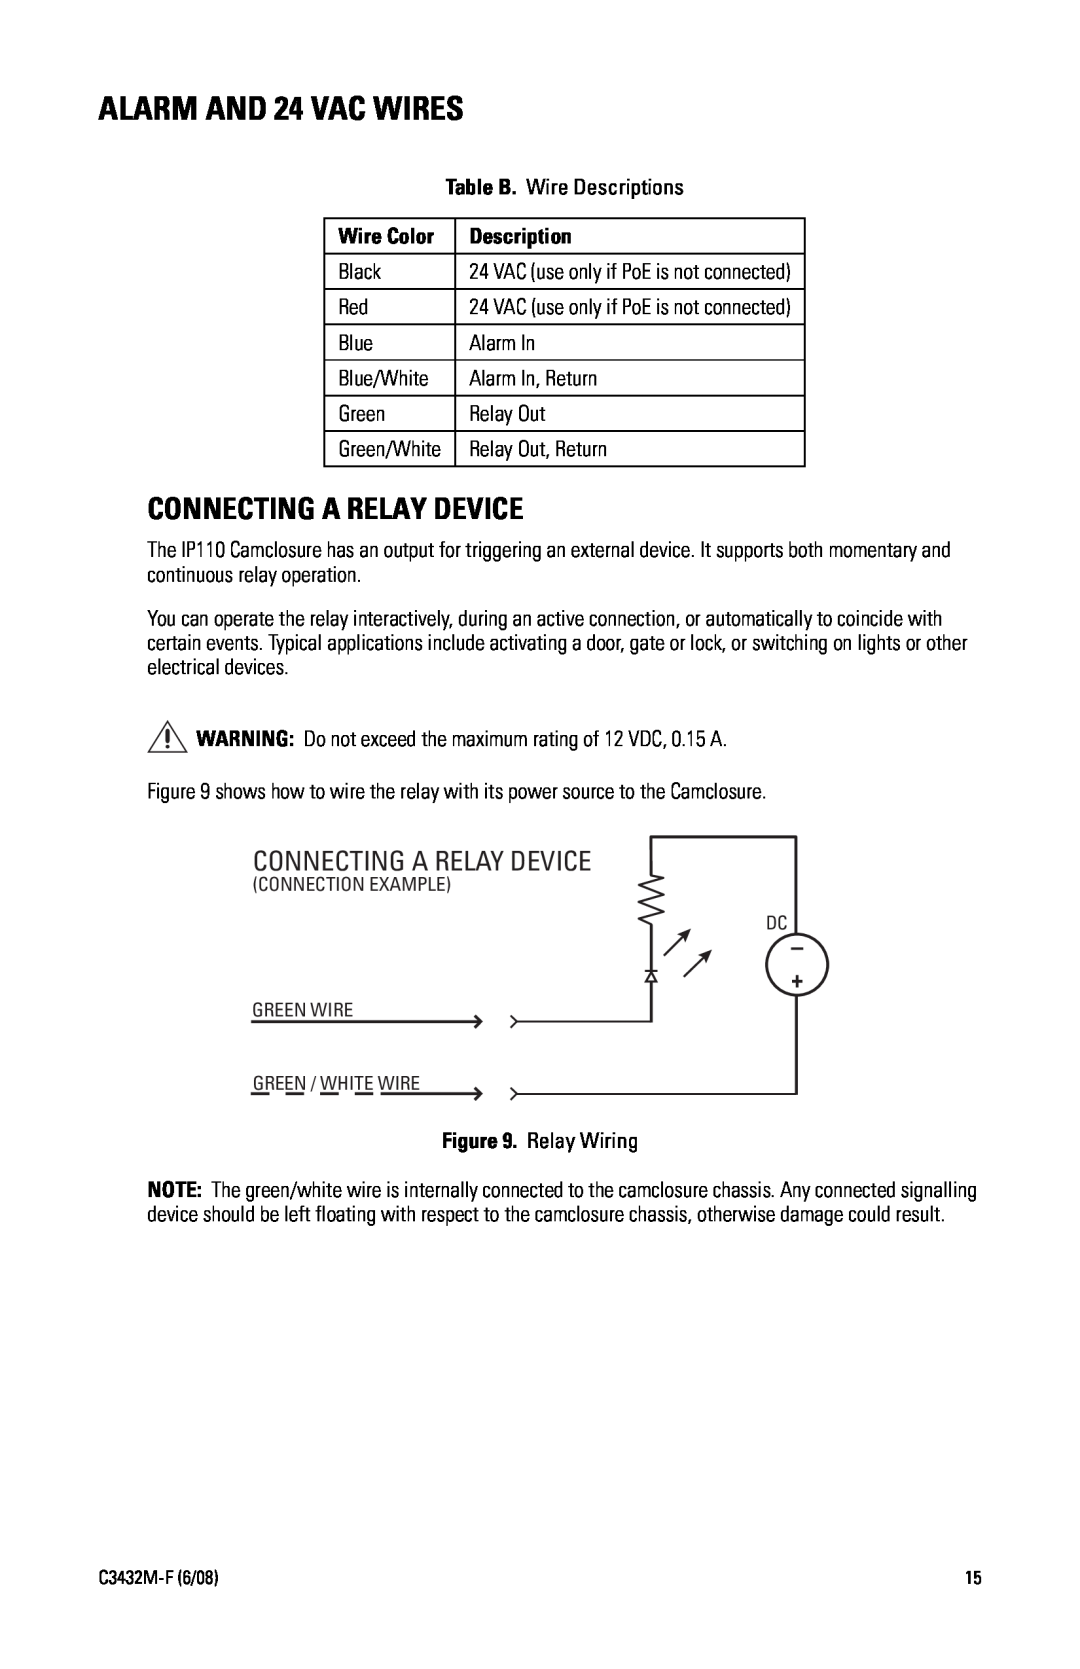 Pelco C3432M-F manual ALARM AND 24 VAC WIRES, Connecting A Relay Device, Description 